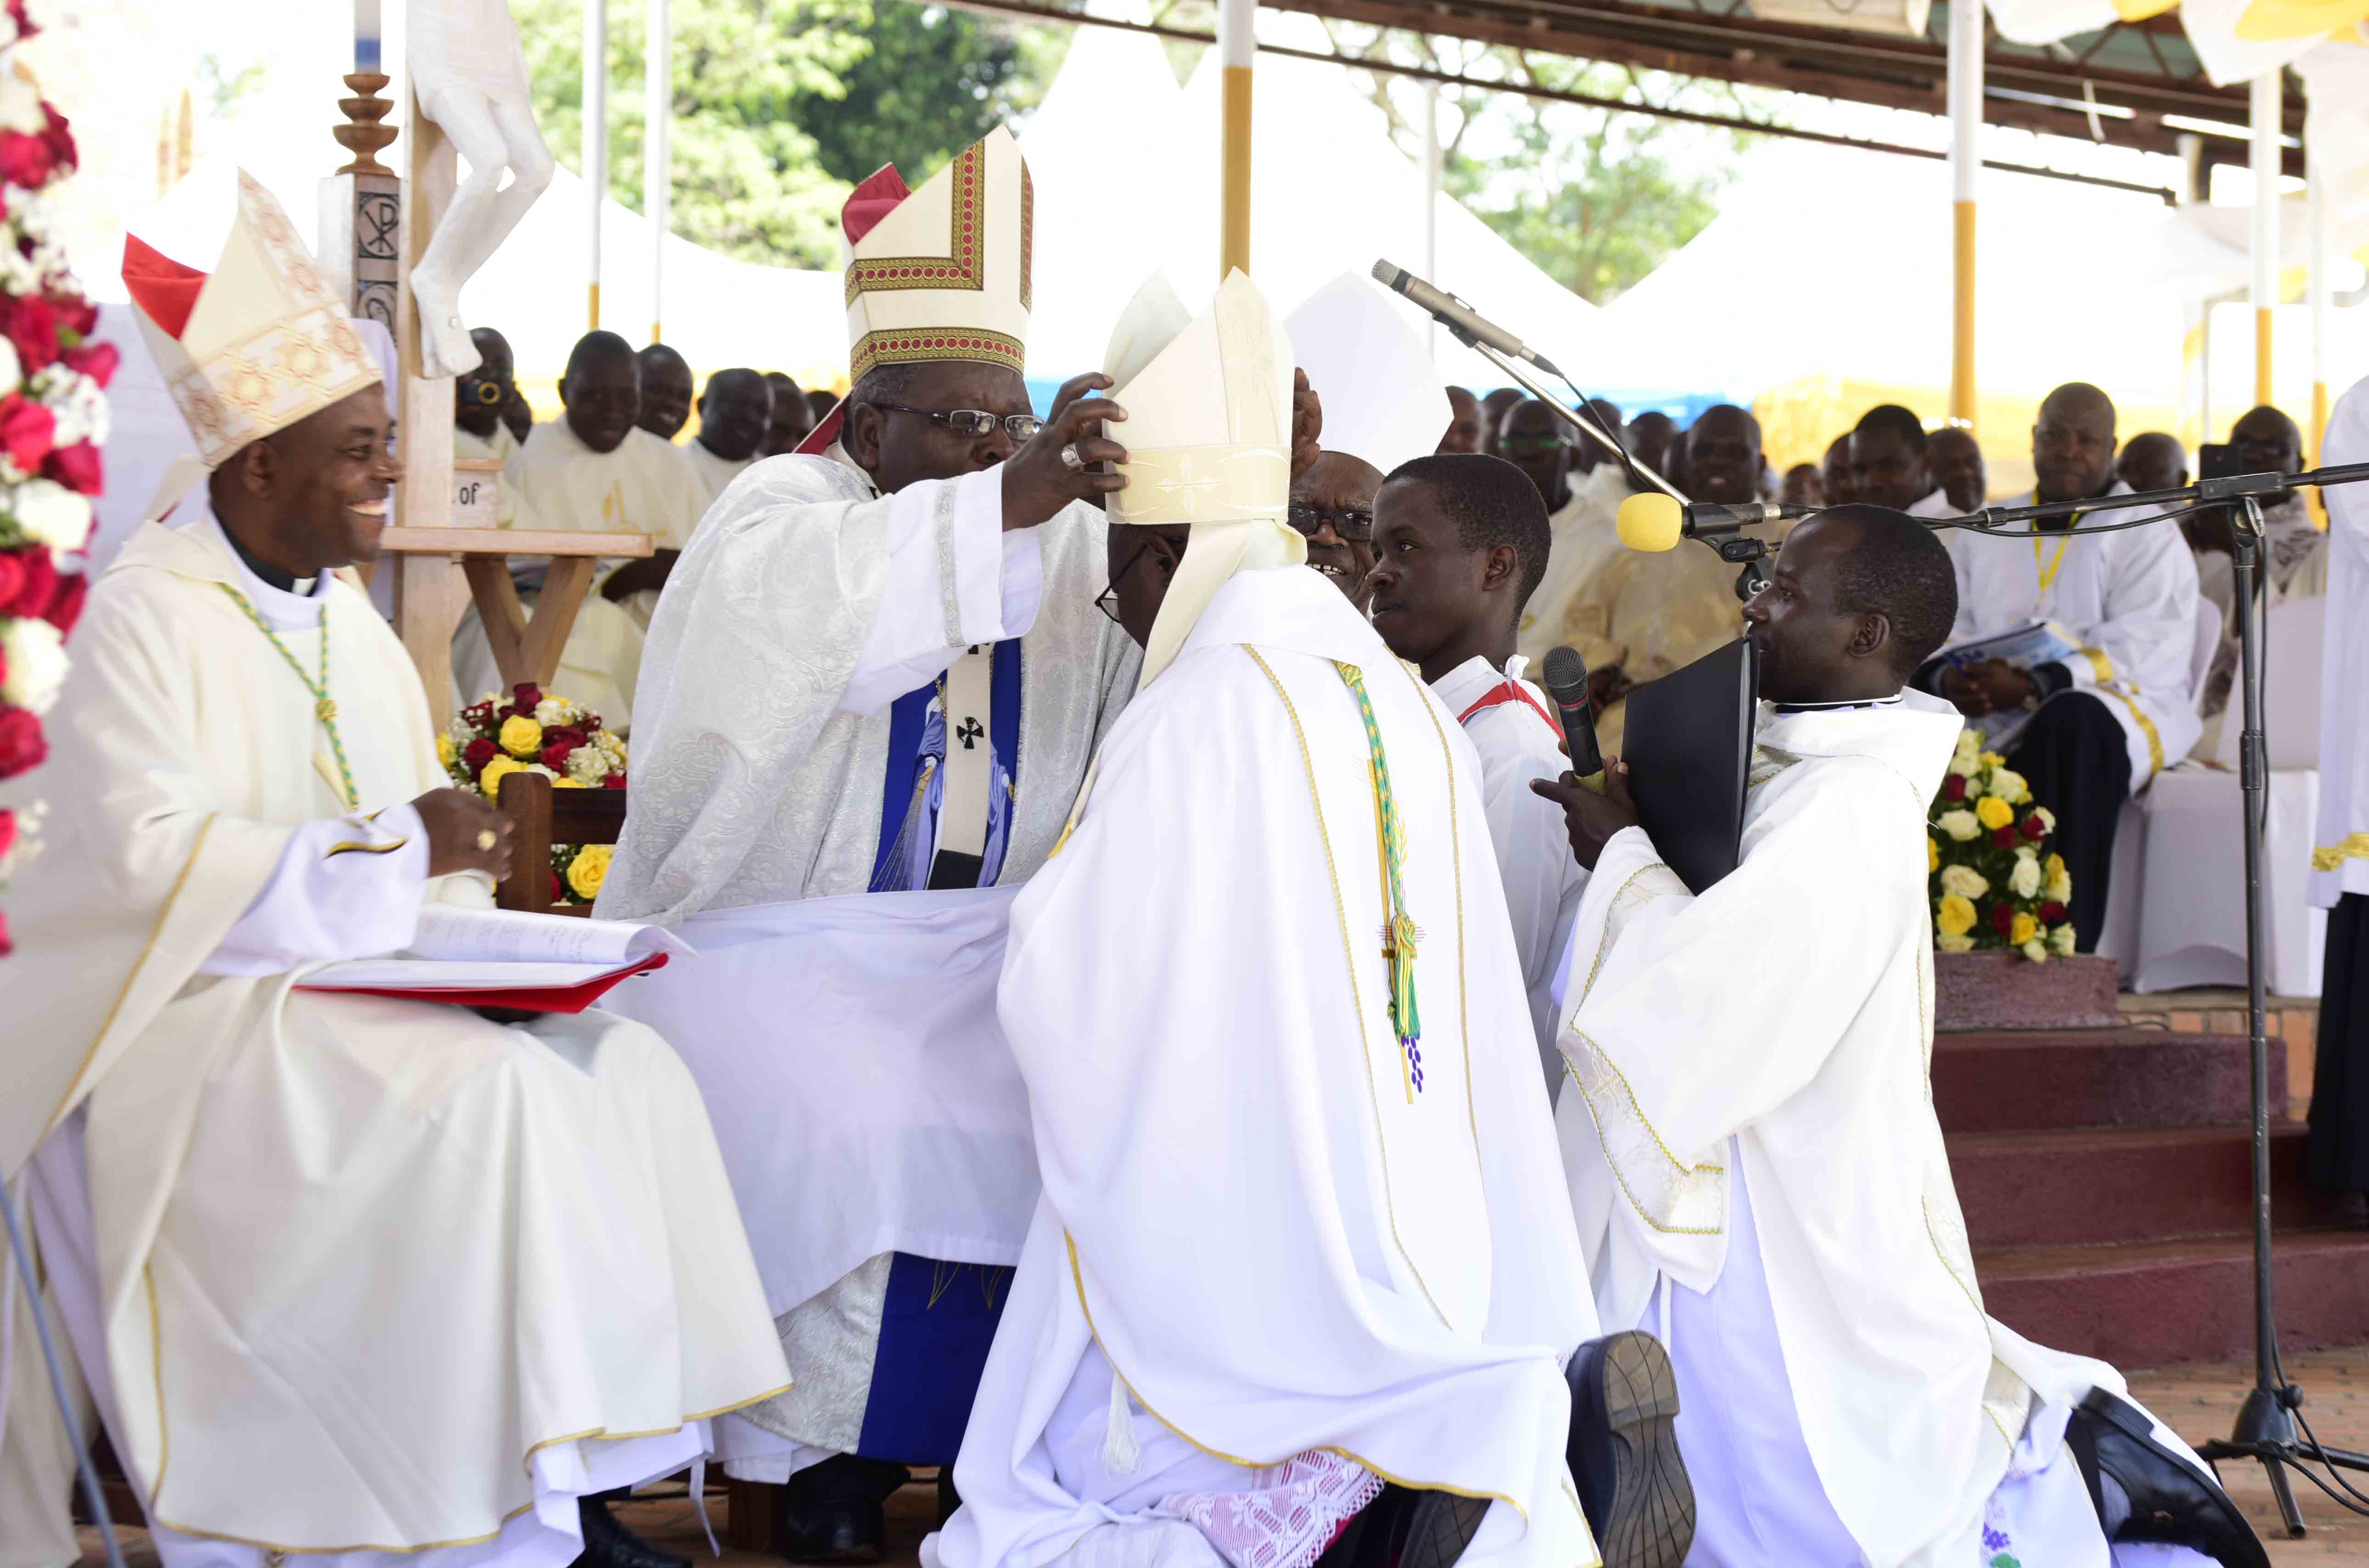 Consecration of the new Bishop Vincent Kirabo